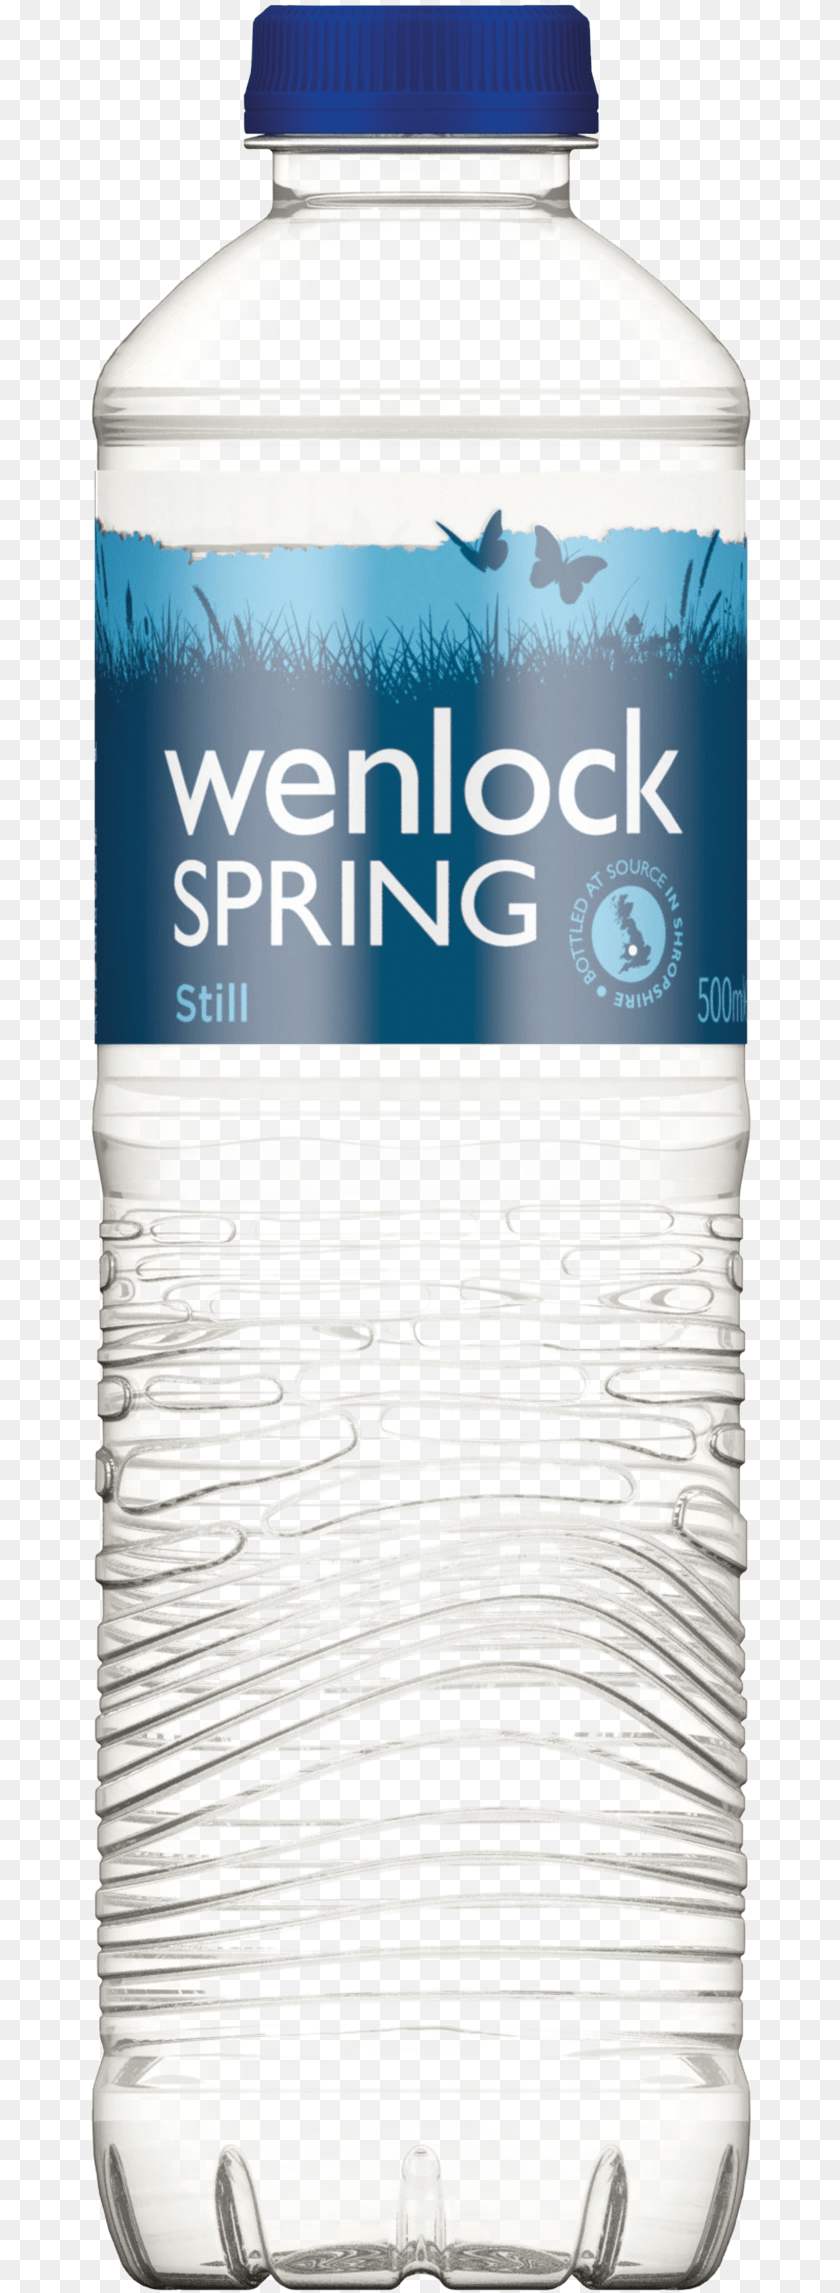 663x2293 They Are Delighted To Be Sponsoring This Fantastic Wenlock Spring Water Ltd, Bottle, Water Bottle, Beverage, Mineral Water Sticker PNG